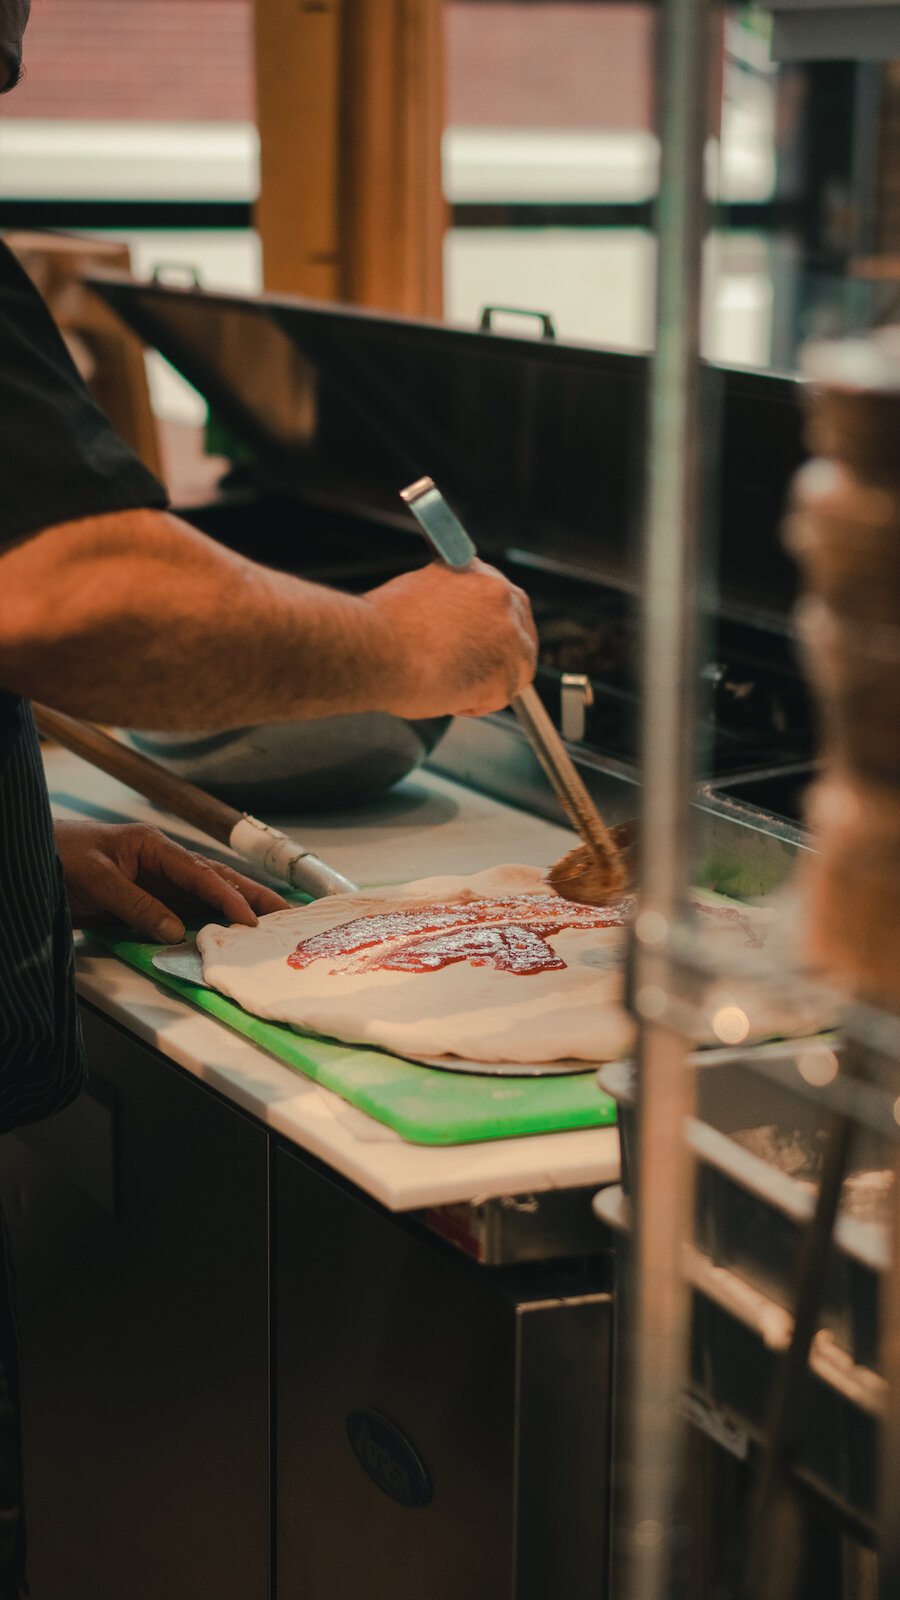 Johnny Bojinoff, owner of Johnny OX Pizzeria, makes a pizza.